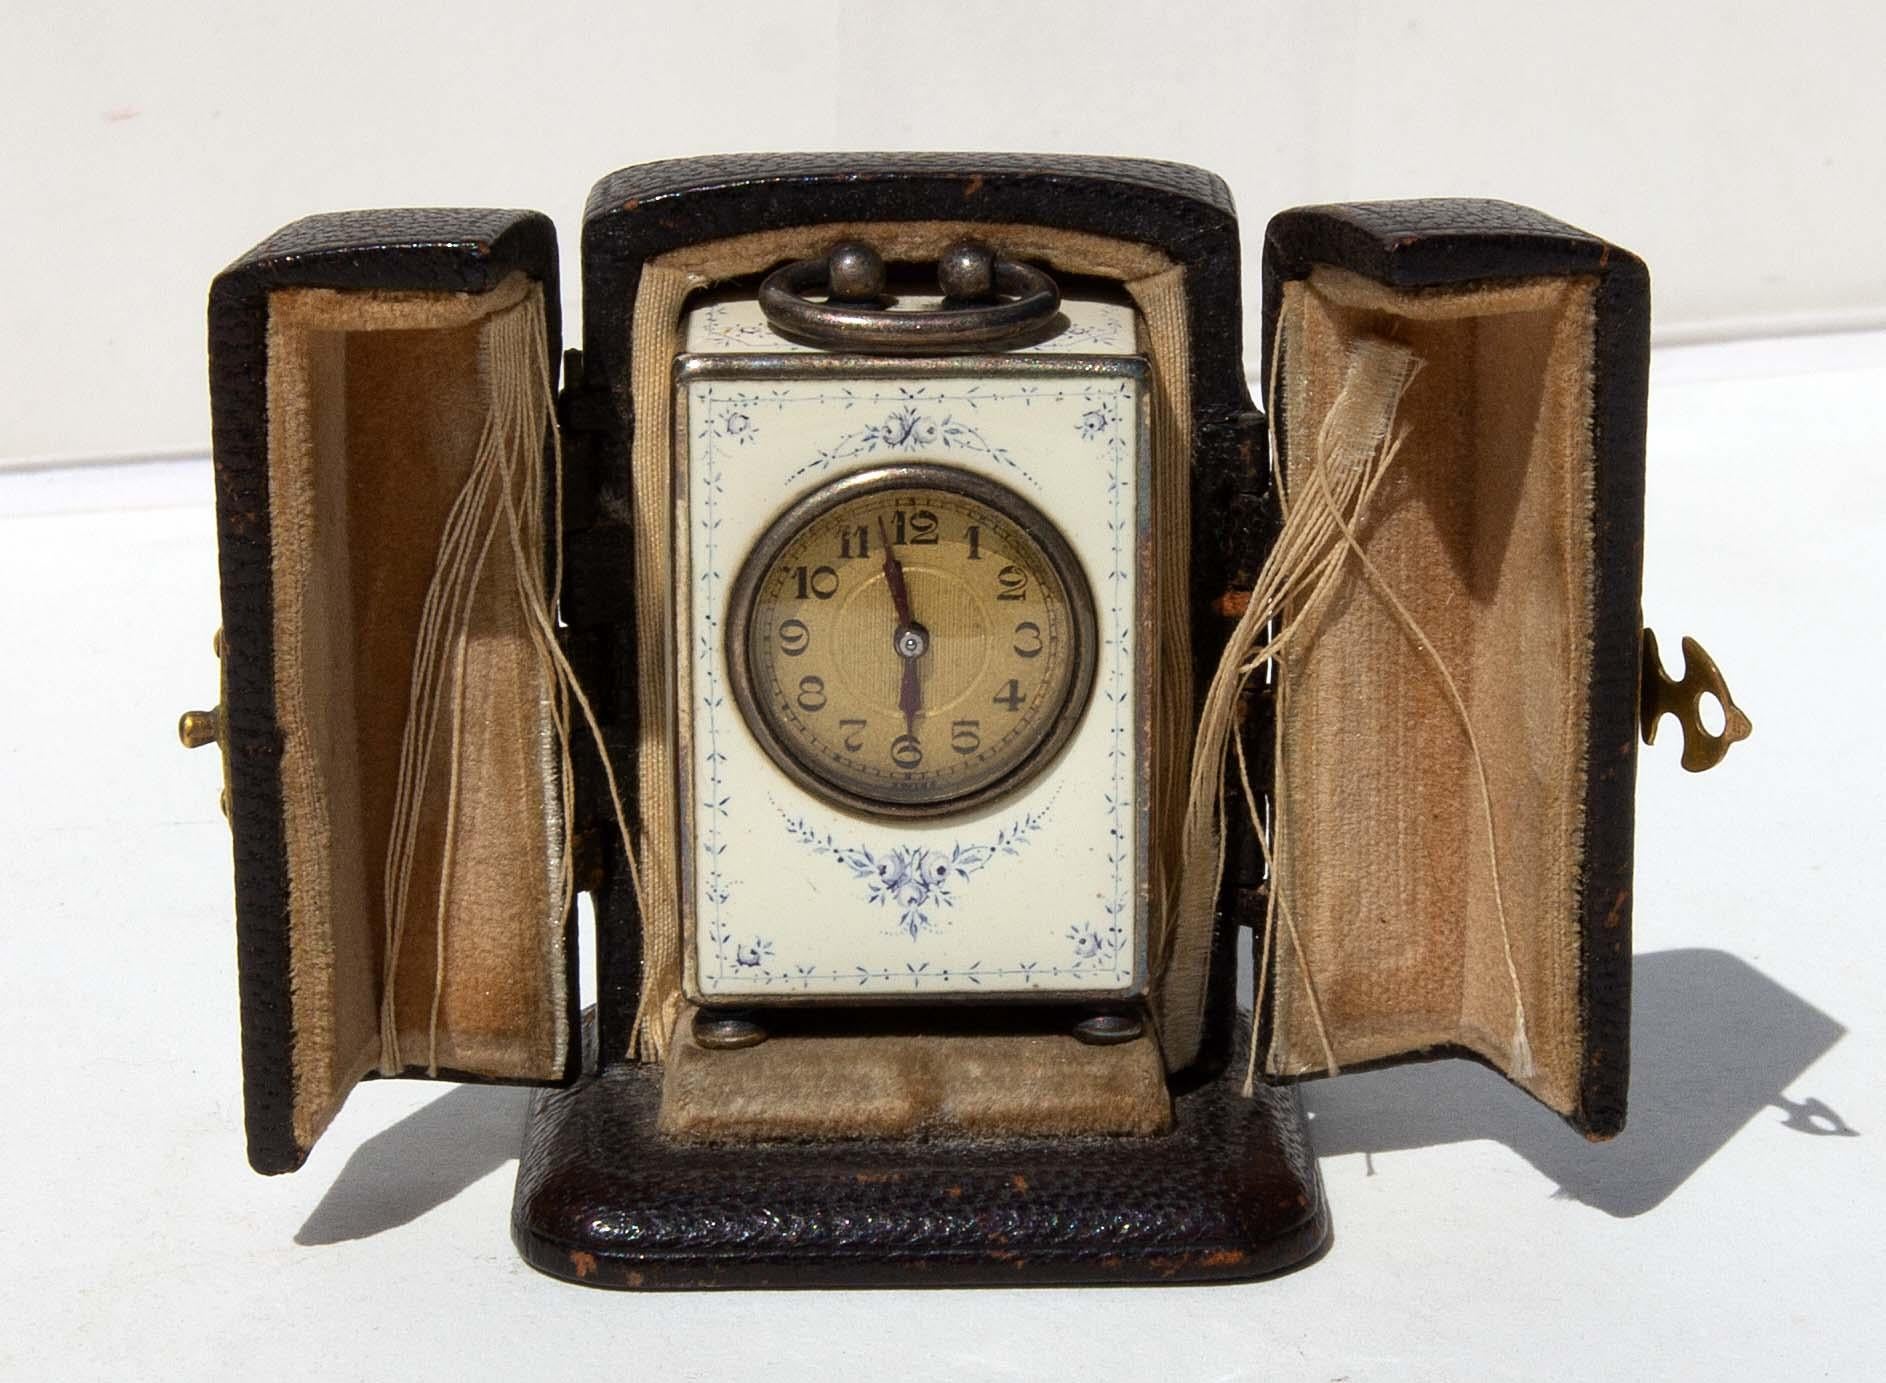 Tiffany & Co. sterling silver blue and white 15 jewel enameled travel clock. Includes original fitted leather bound presentation case. Made by Swiss watch maker Concord. Hallmarked, circa 1920. Monogrammed on back.